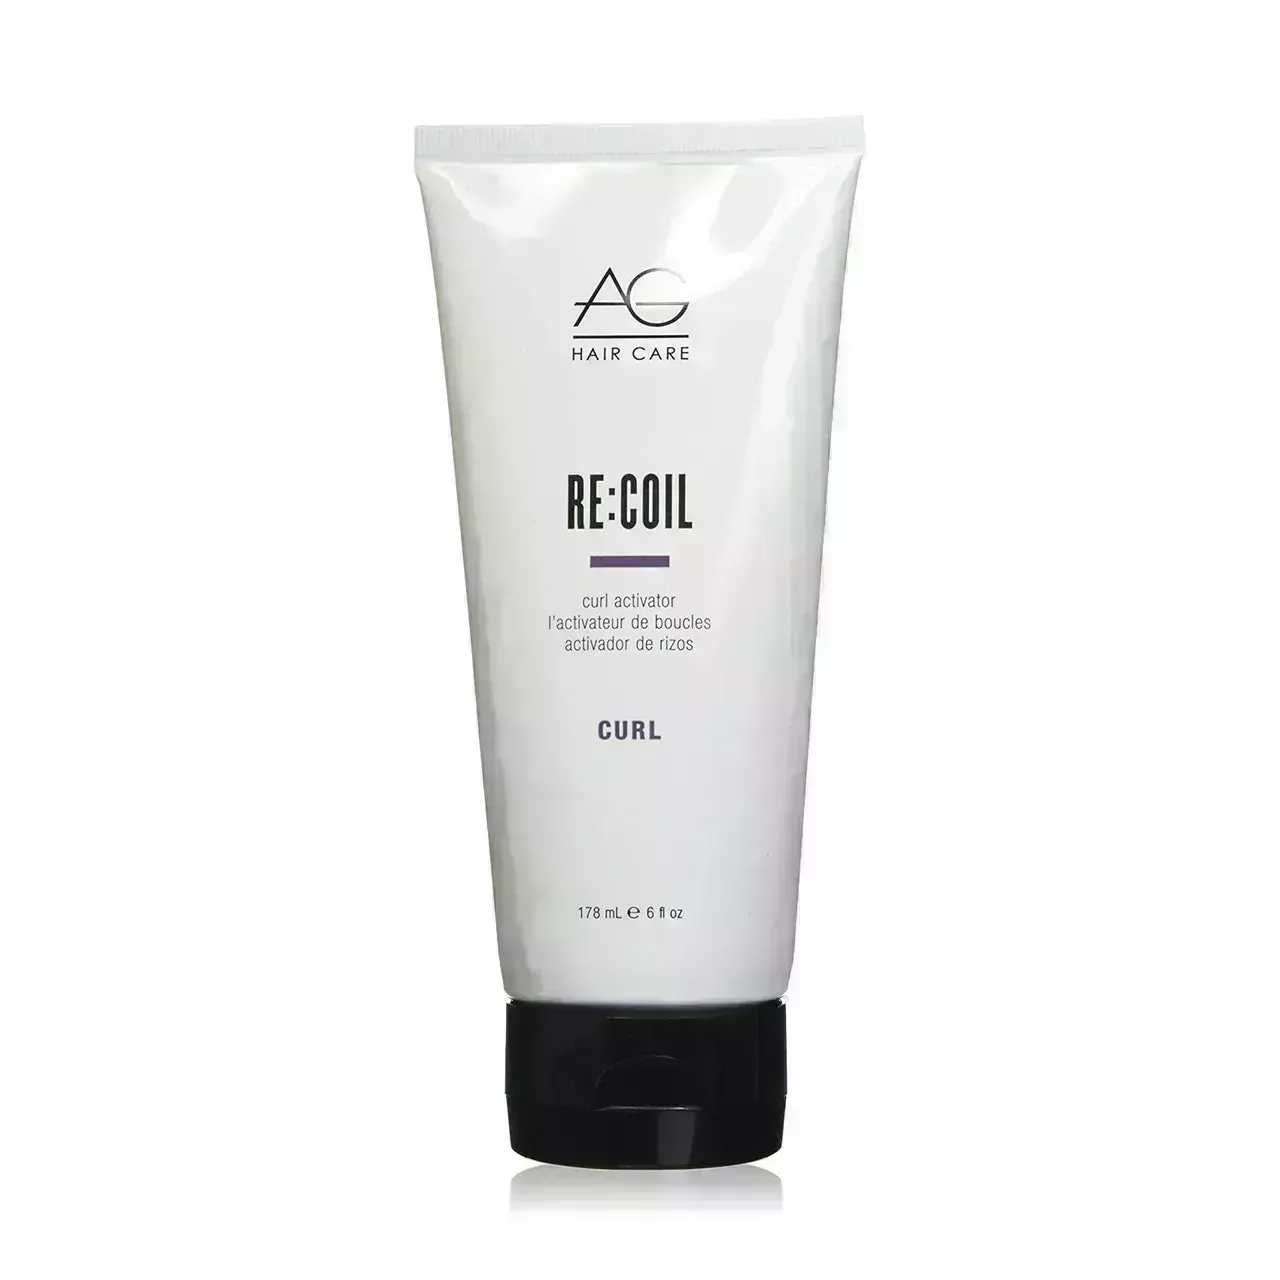 AG Hair Recoil Curl Activator white tube with black cap on white background